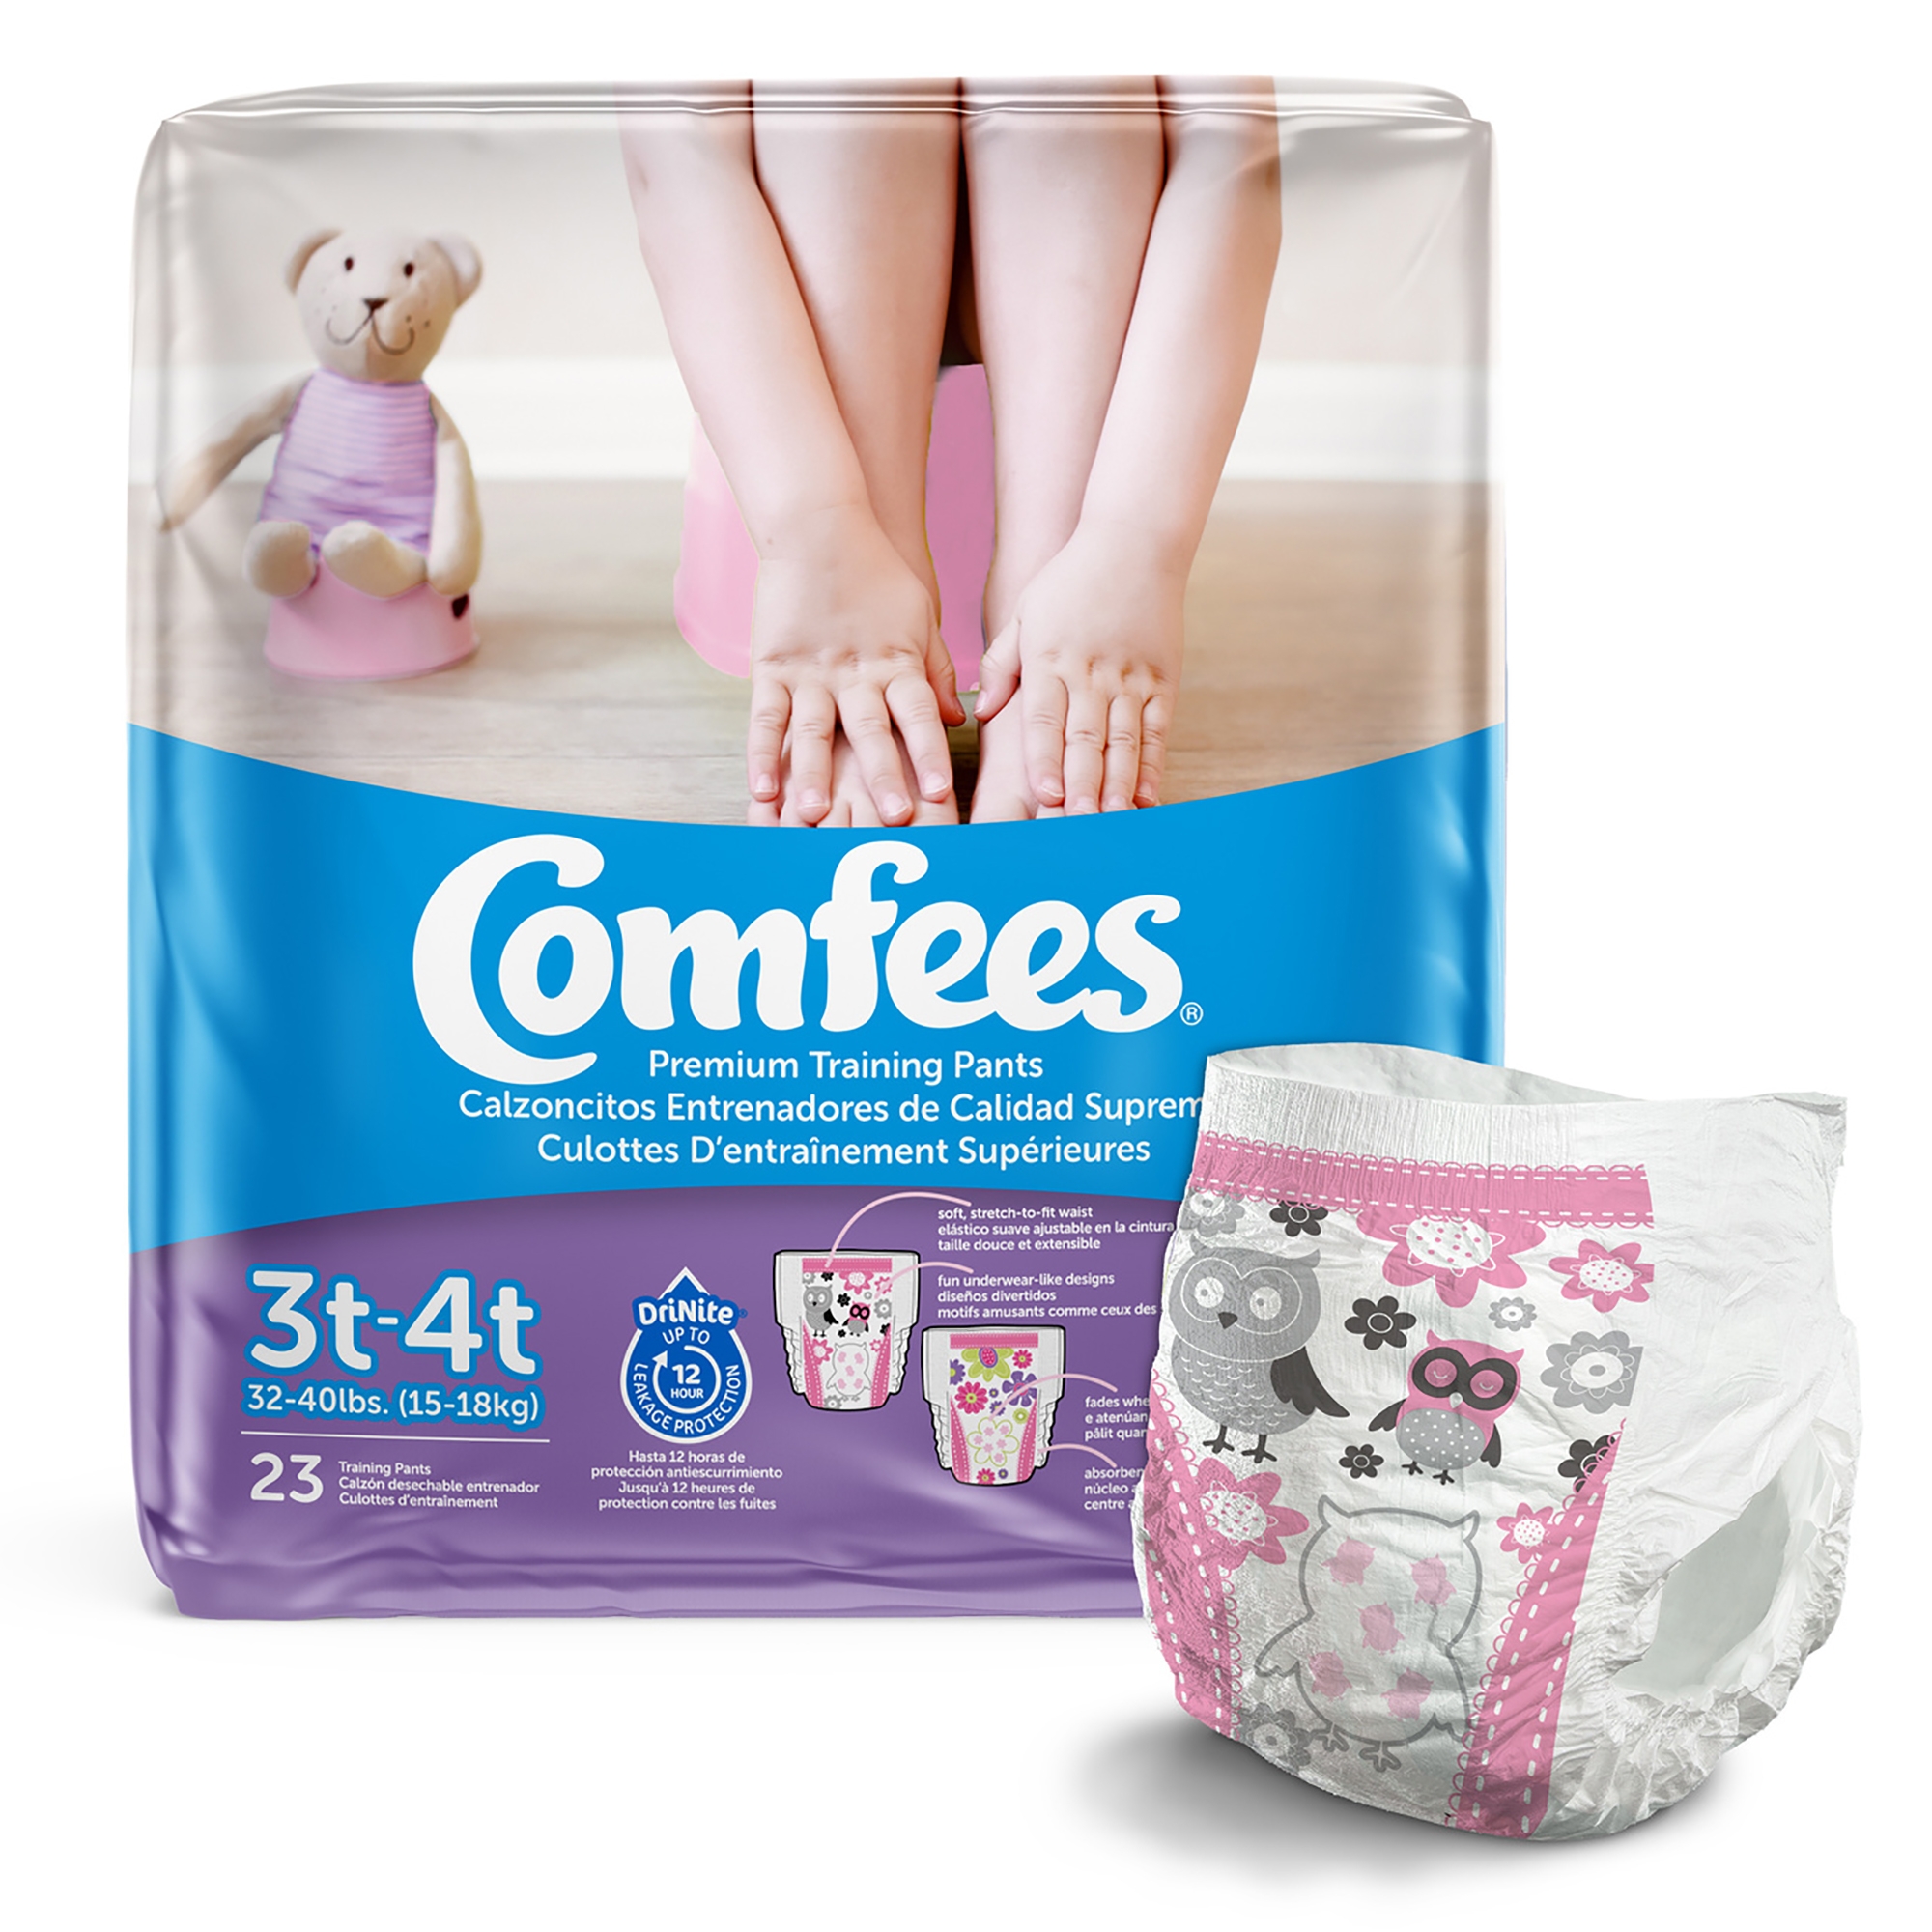 Comfees Training Pants for Girls, DriNite 12-hr Leakage Protection, 3T-4T, 23 Count, 6 Packs, 138 Total - image 1 of 5